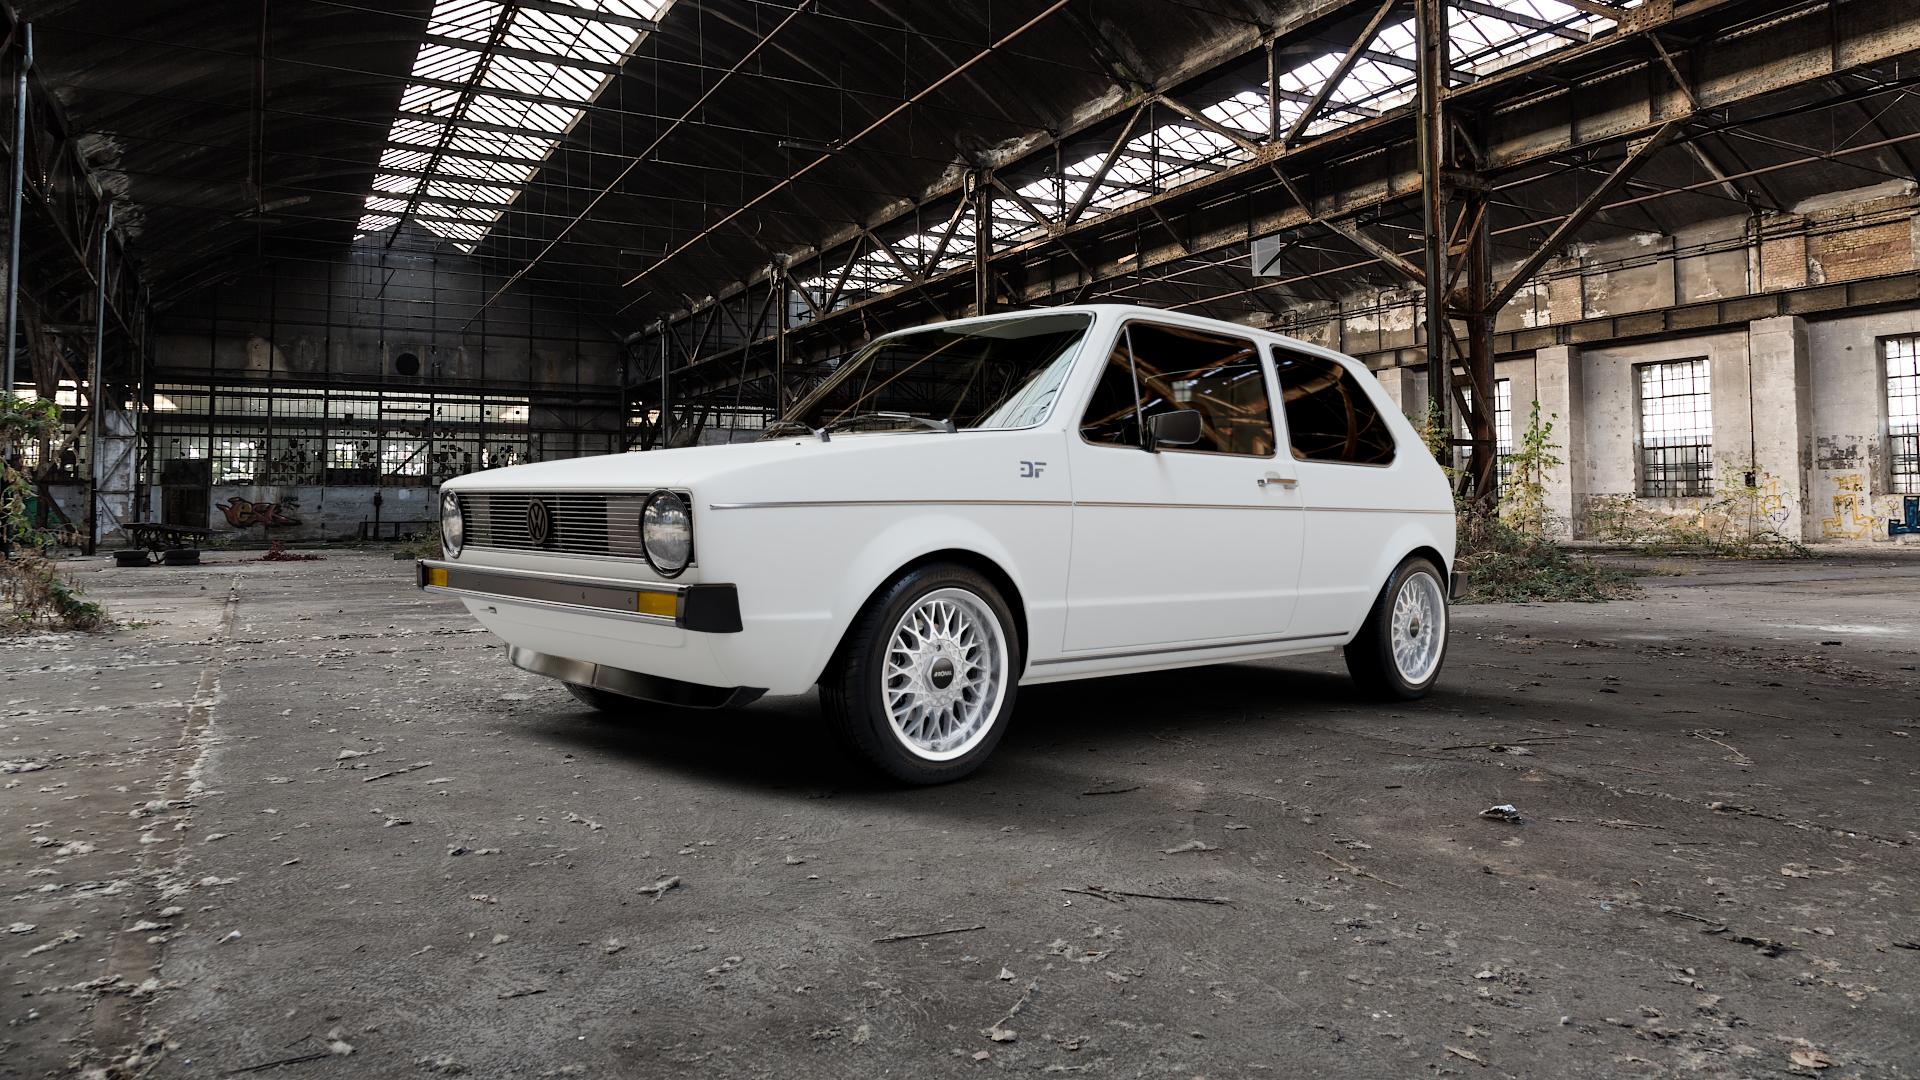 Volkswagen (VW) Golf 1 1,6l 55kW (75 hp) Wheels and Tyre Packages |  velonity.com